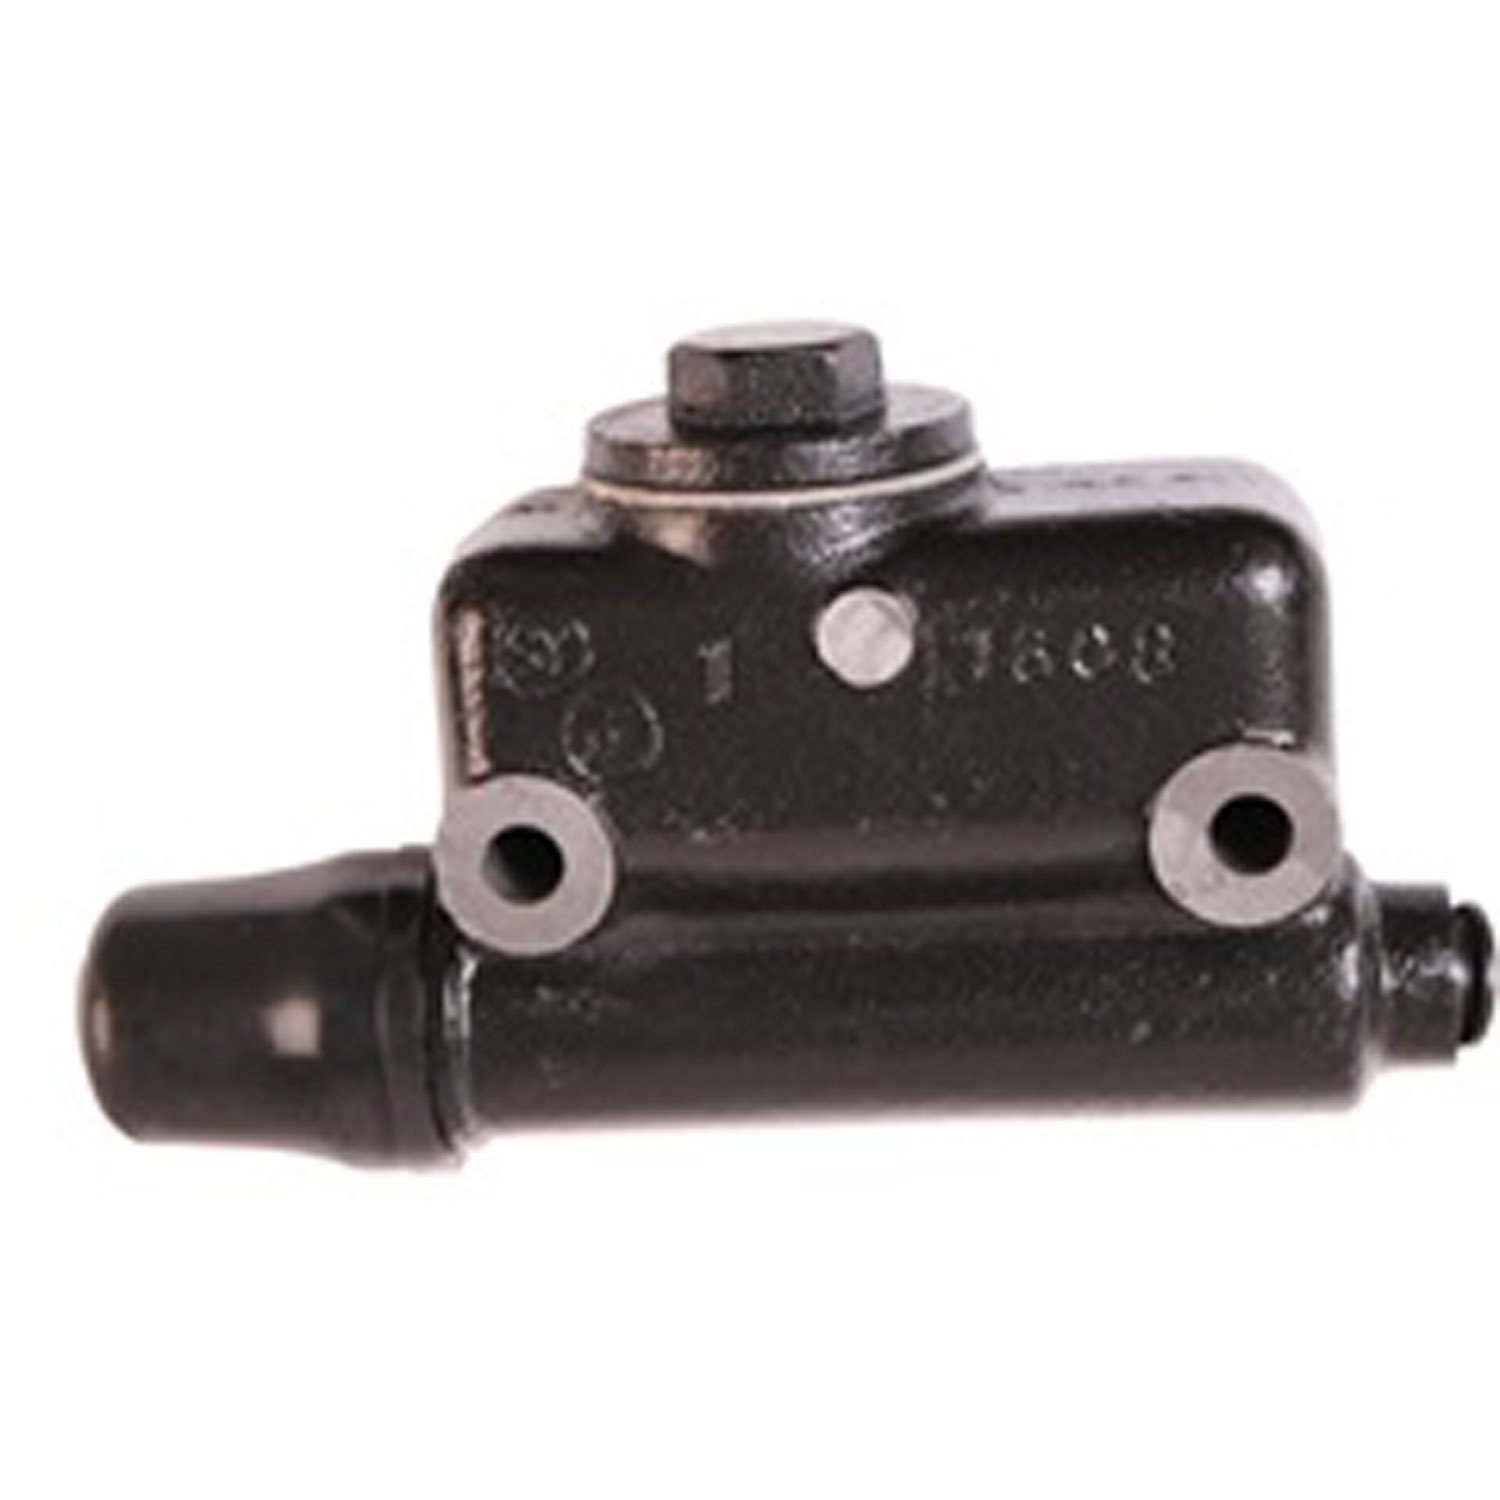 Factory-style replacement brake master cylinder, Fits 48-66 Willys models Includes boot both mo